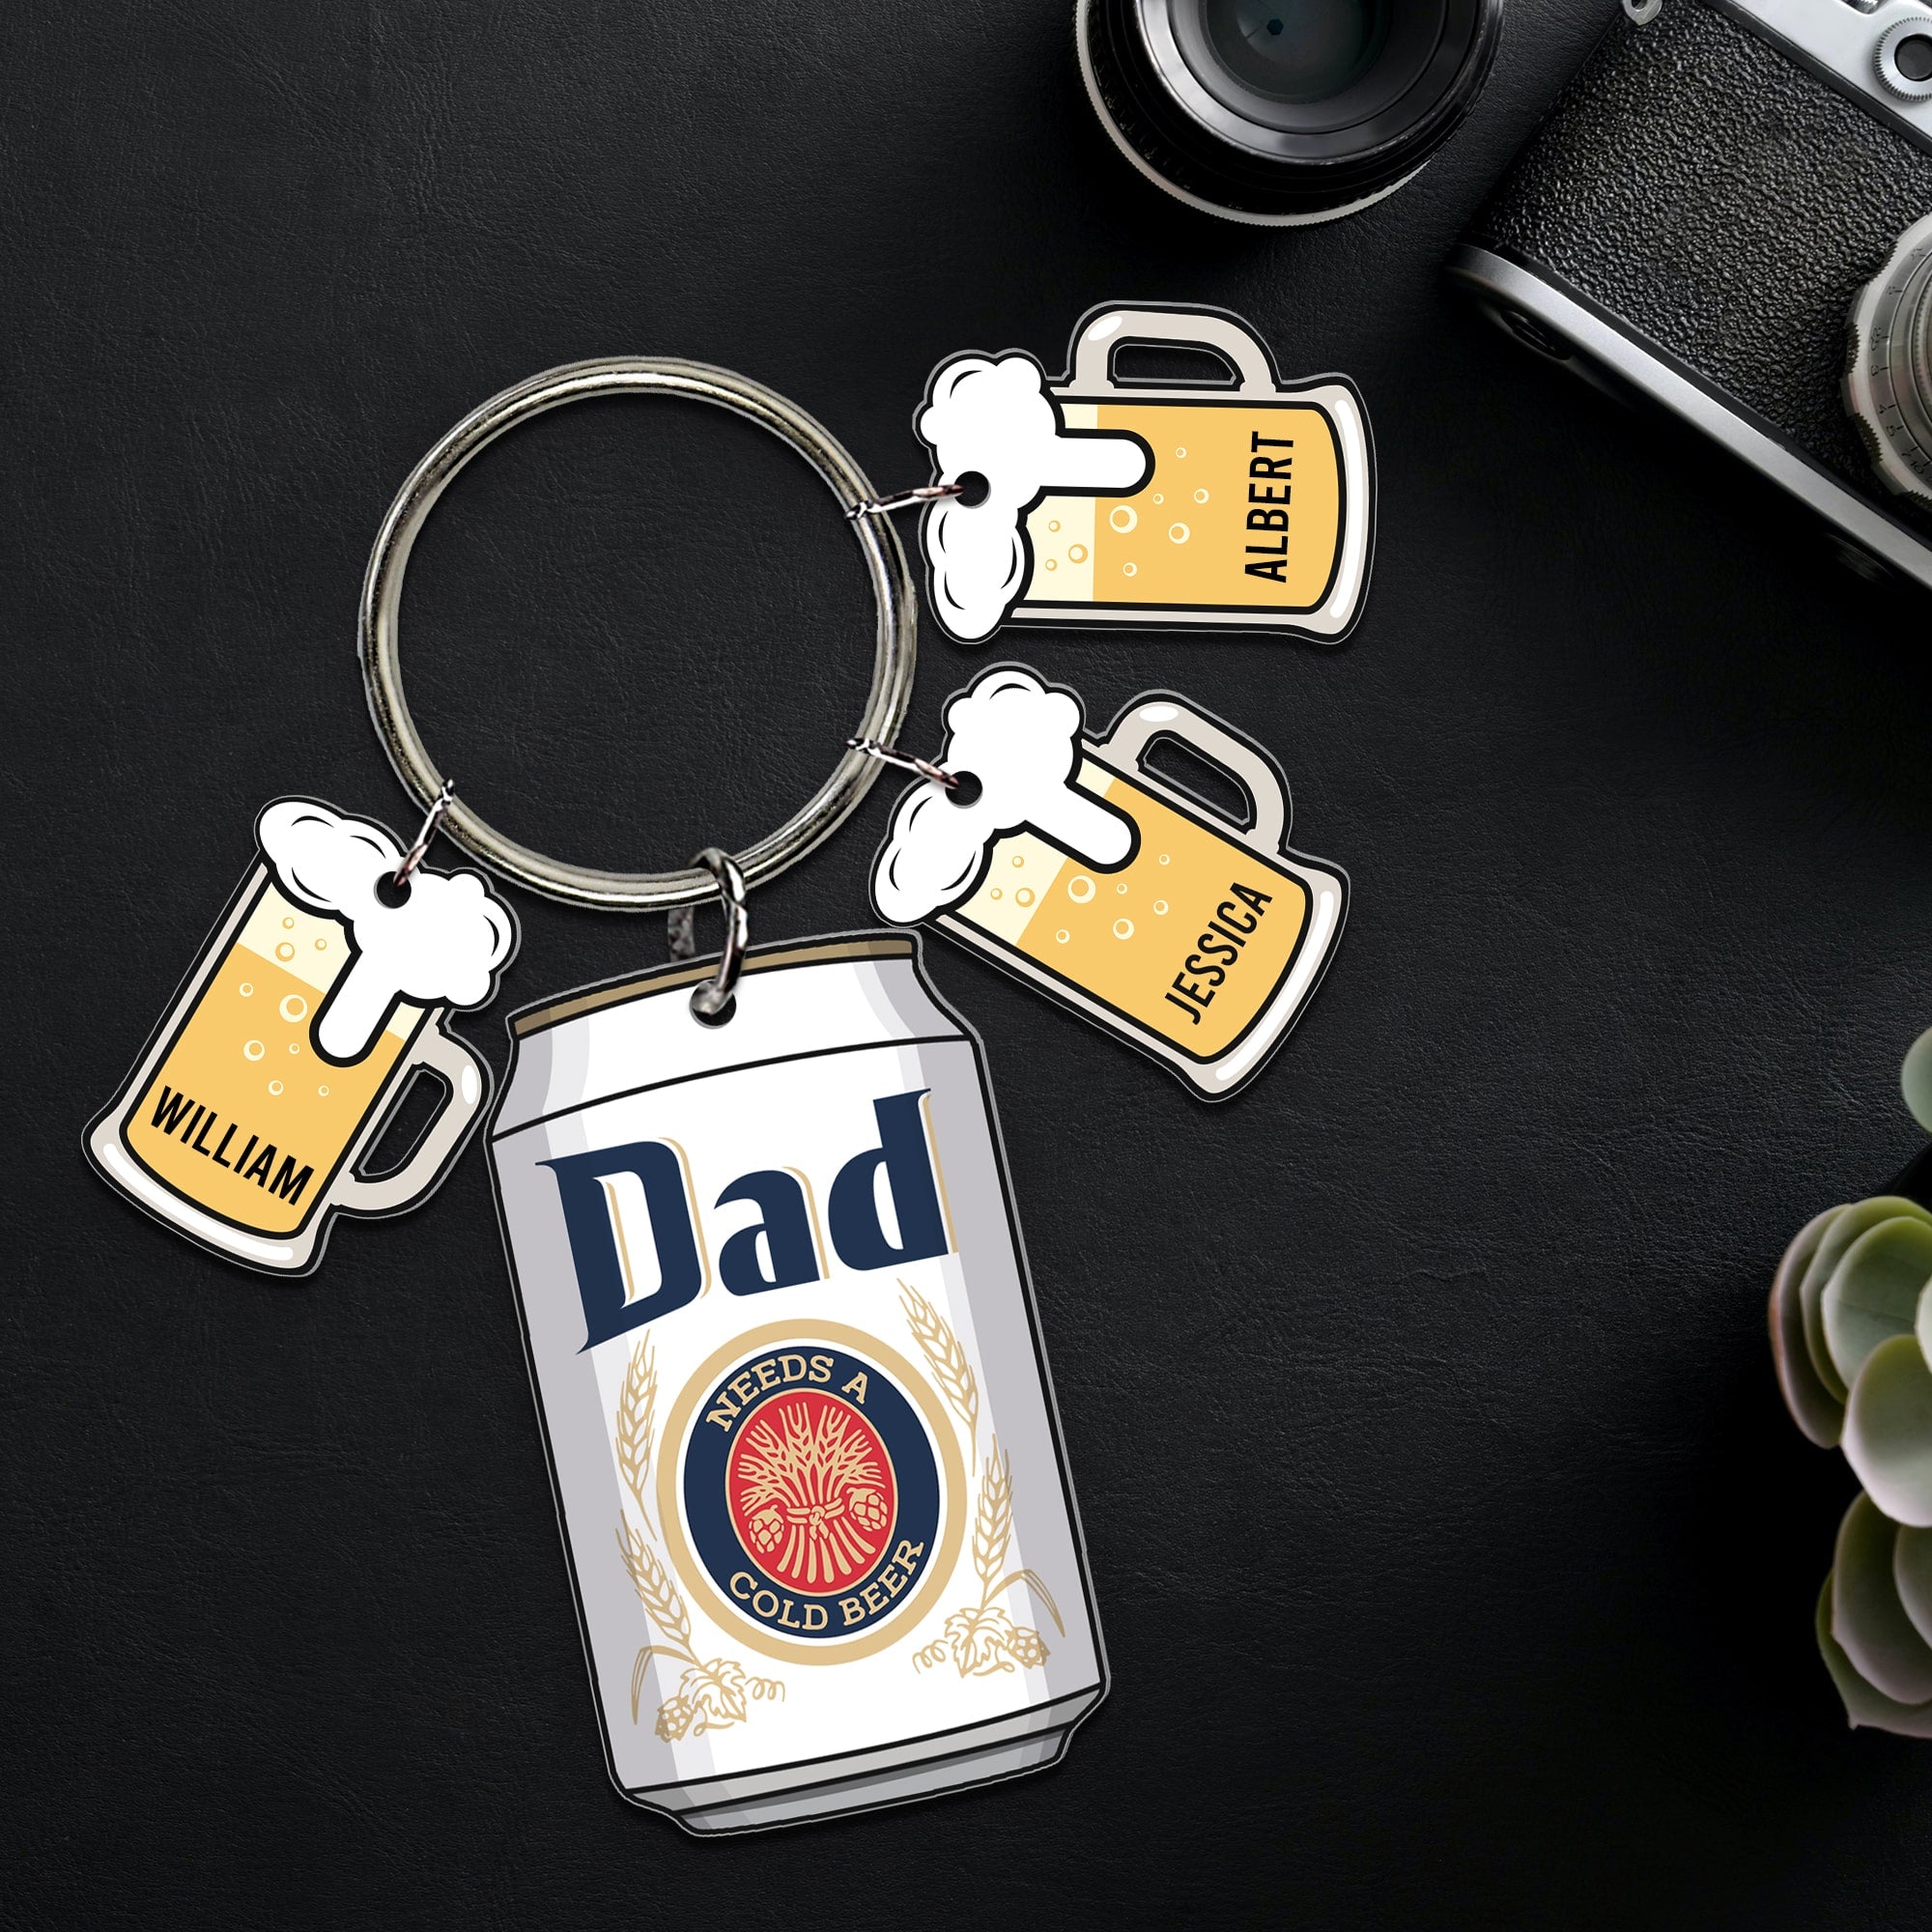 Personalized Gifts For Dad Keychain 02naqn240524 Father's Day-Homacus